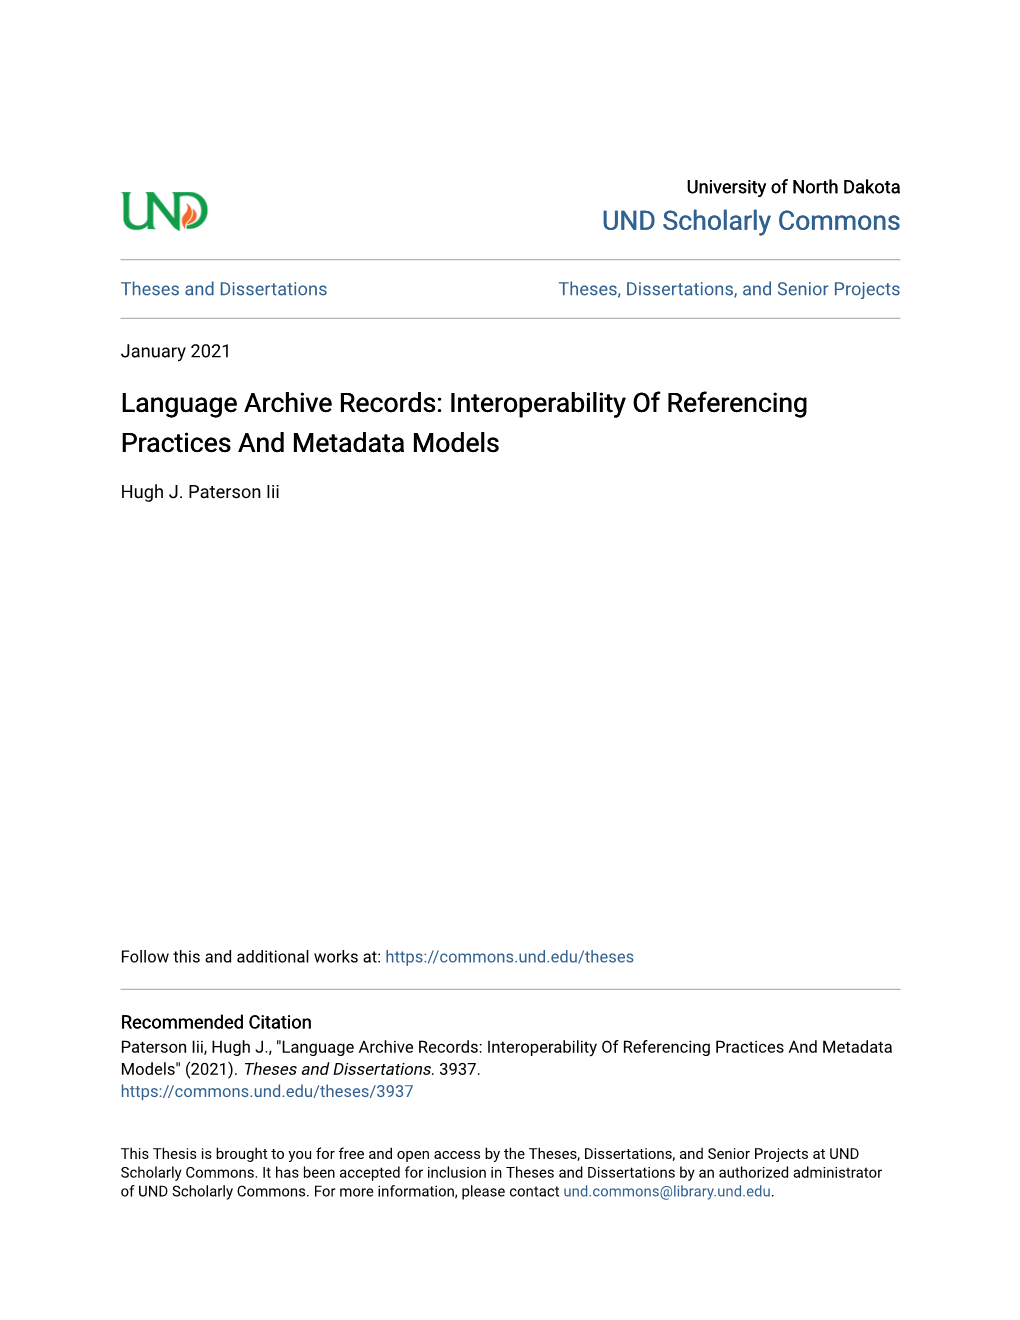 Language Archive Records: Interoperability of Referencing Practices and Metadata Models